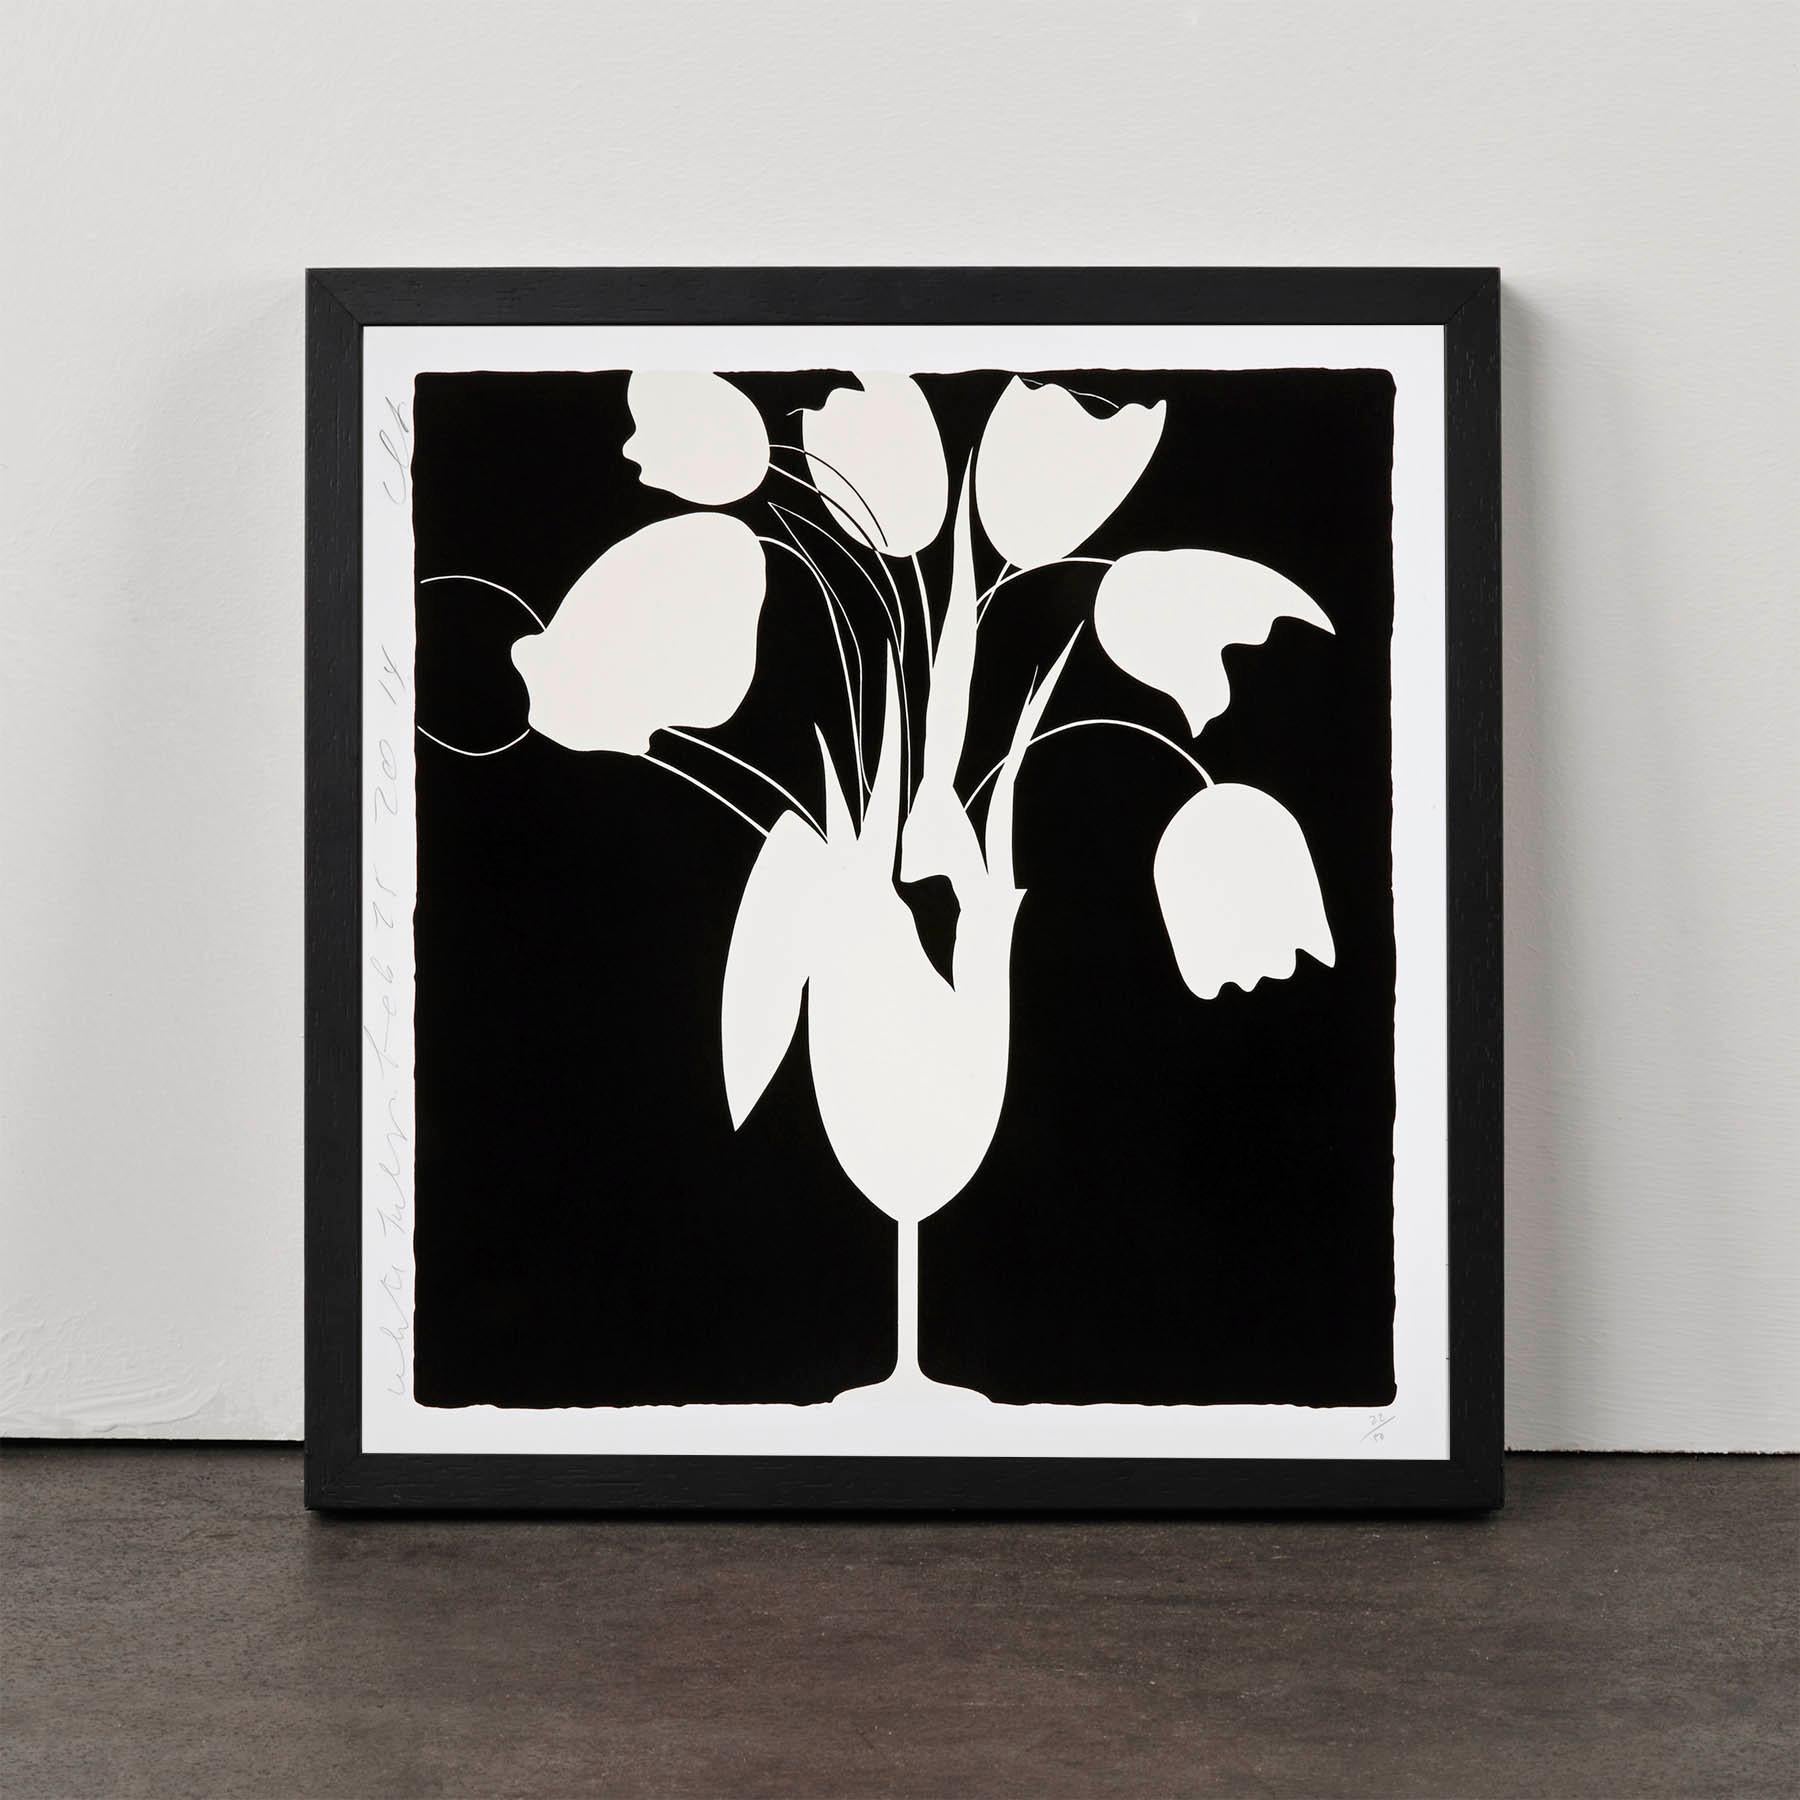 White Tulips and Vase, Feb 25 - Contemporary, 21st Century, Silkscreen, Tulips - Print by Donald Sultan